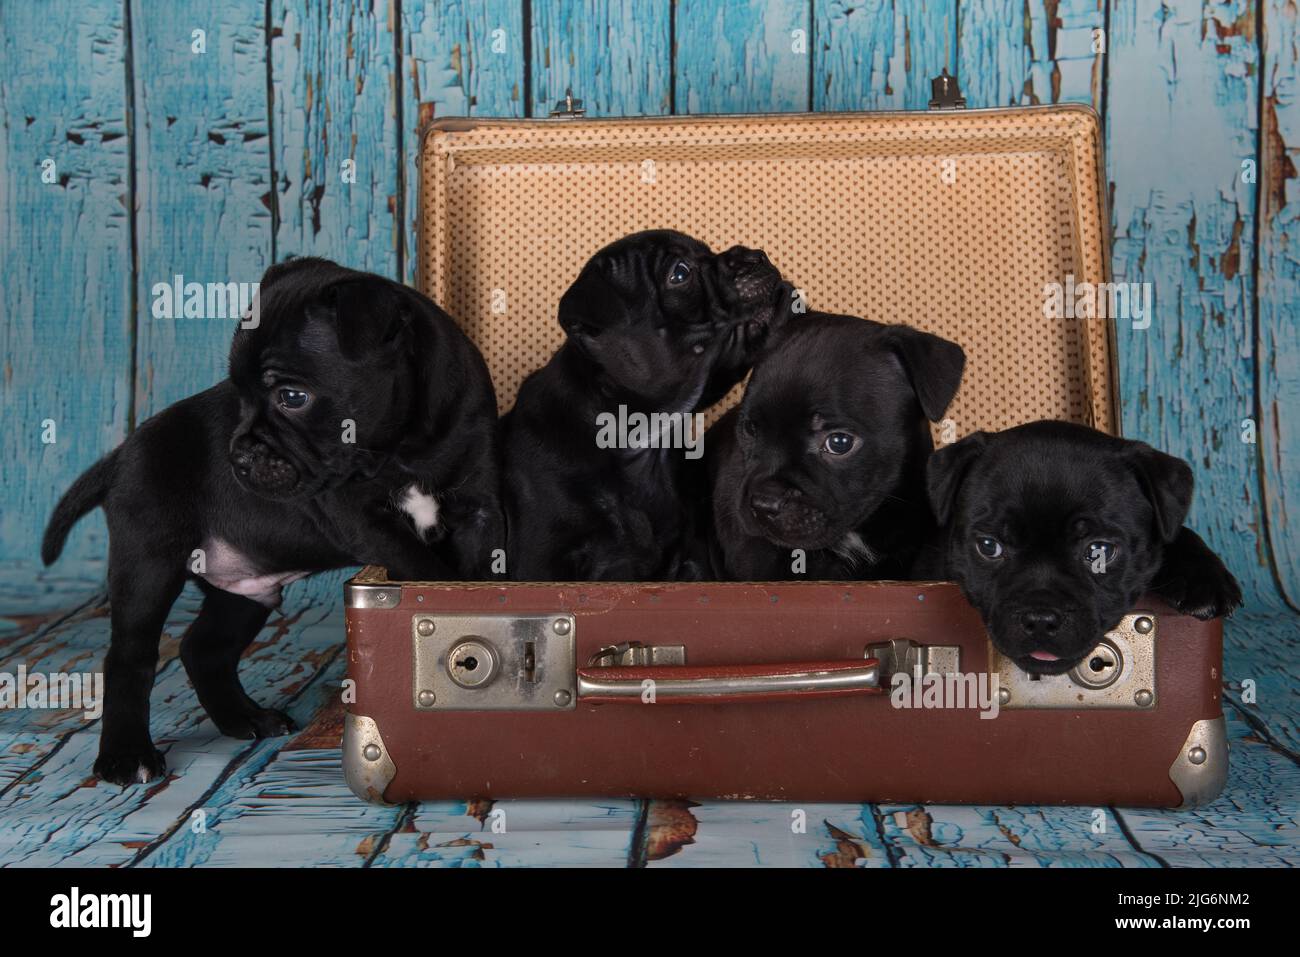 Four Black American Staffordshire Terrier dogs or AmStaff puppies in a retro suitcase on blue background Stock Photo